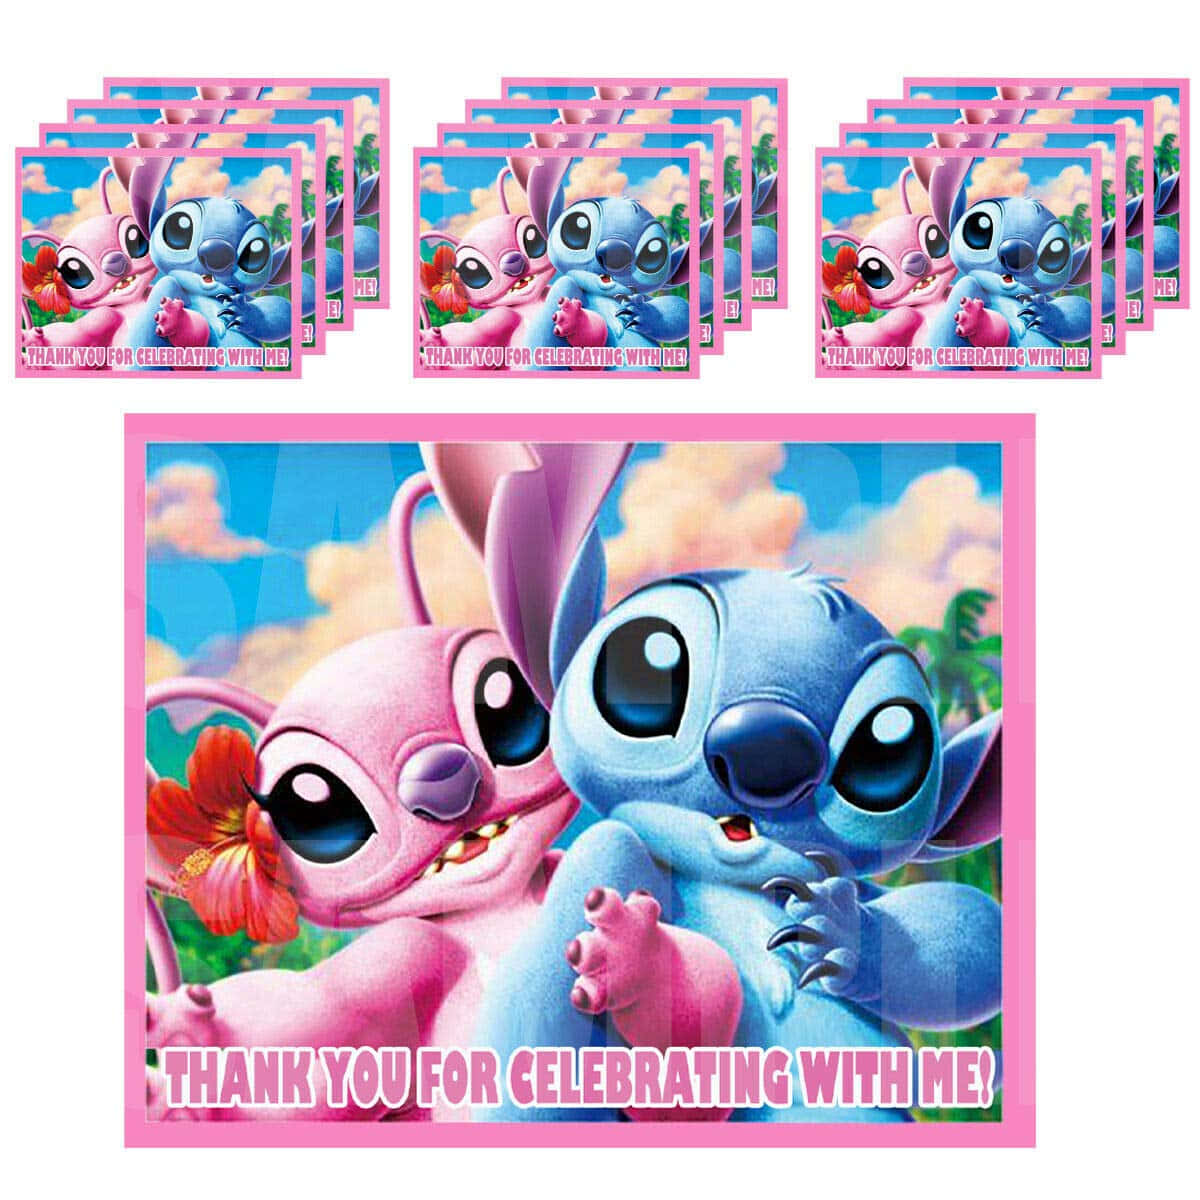 Cute Stitch And Angel Cards Wallpaper